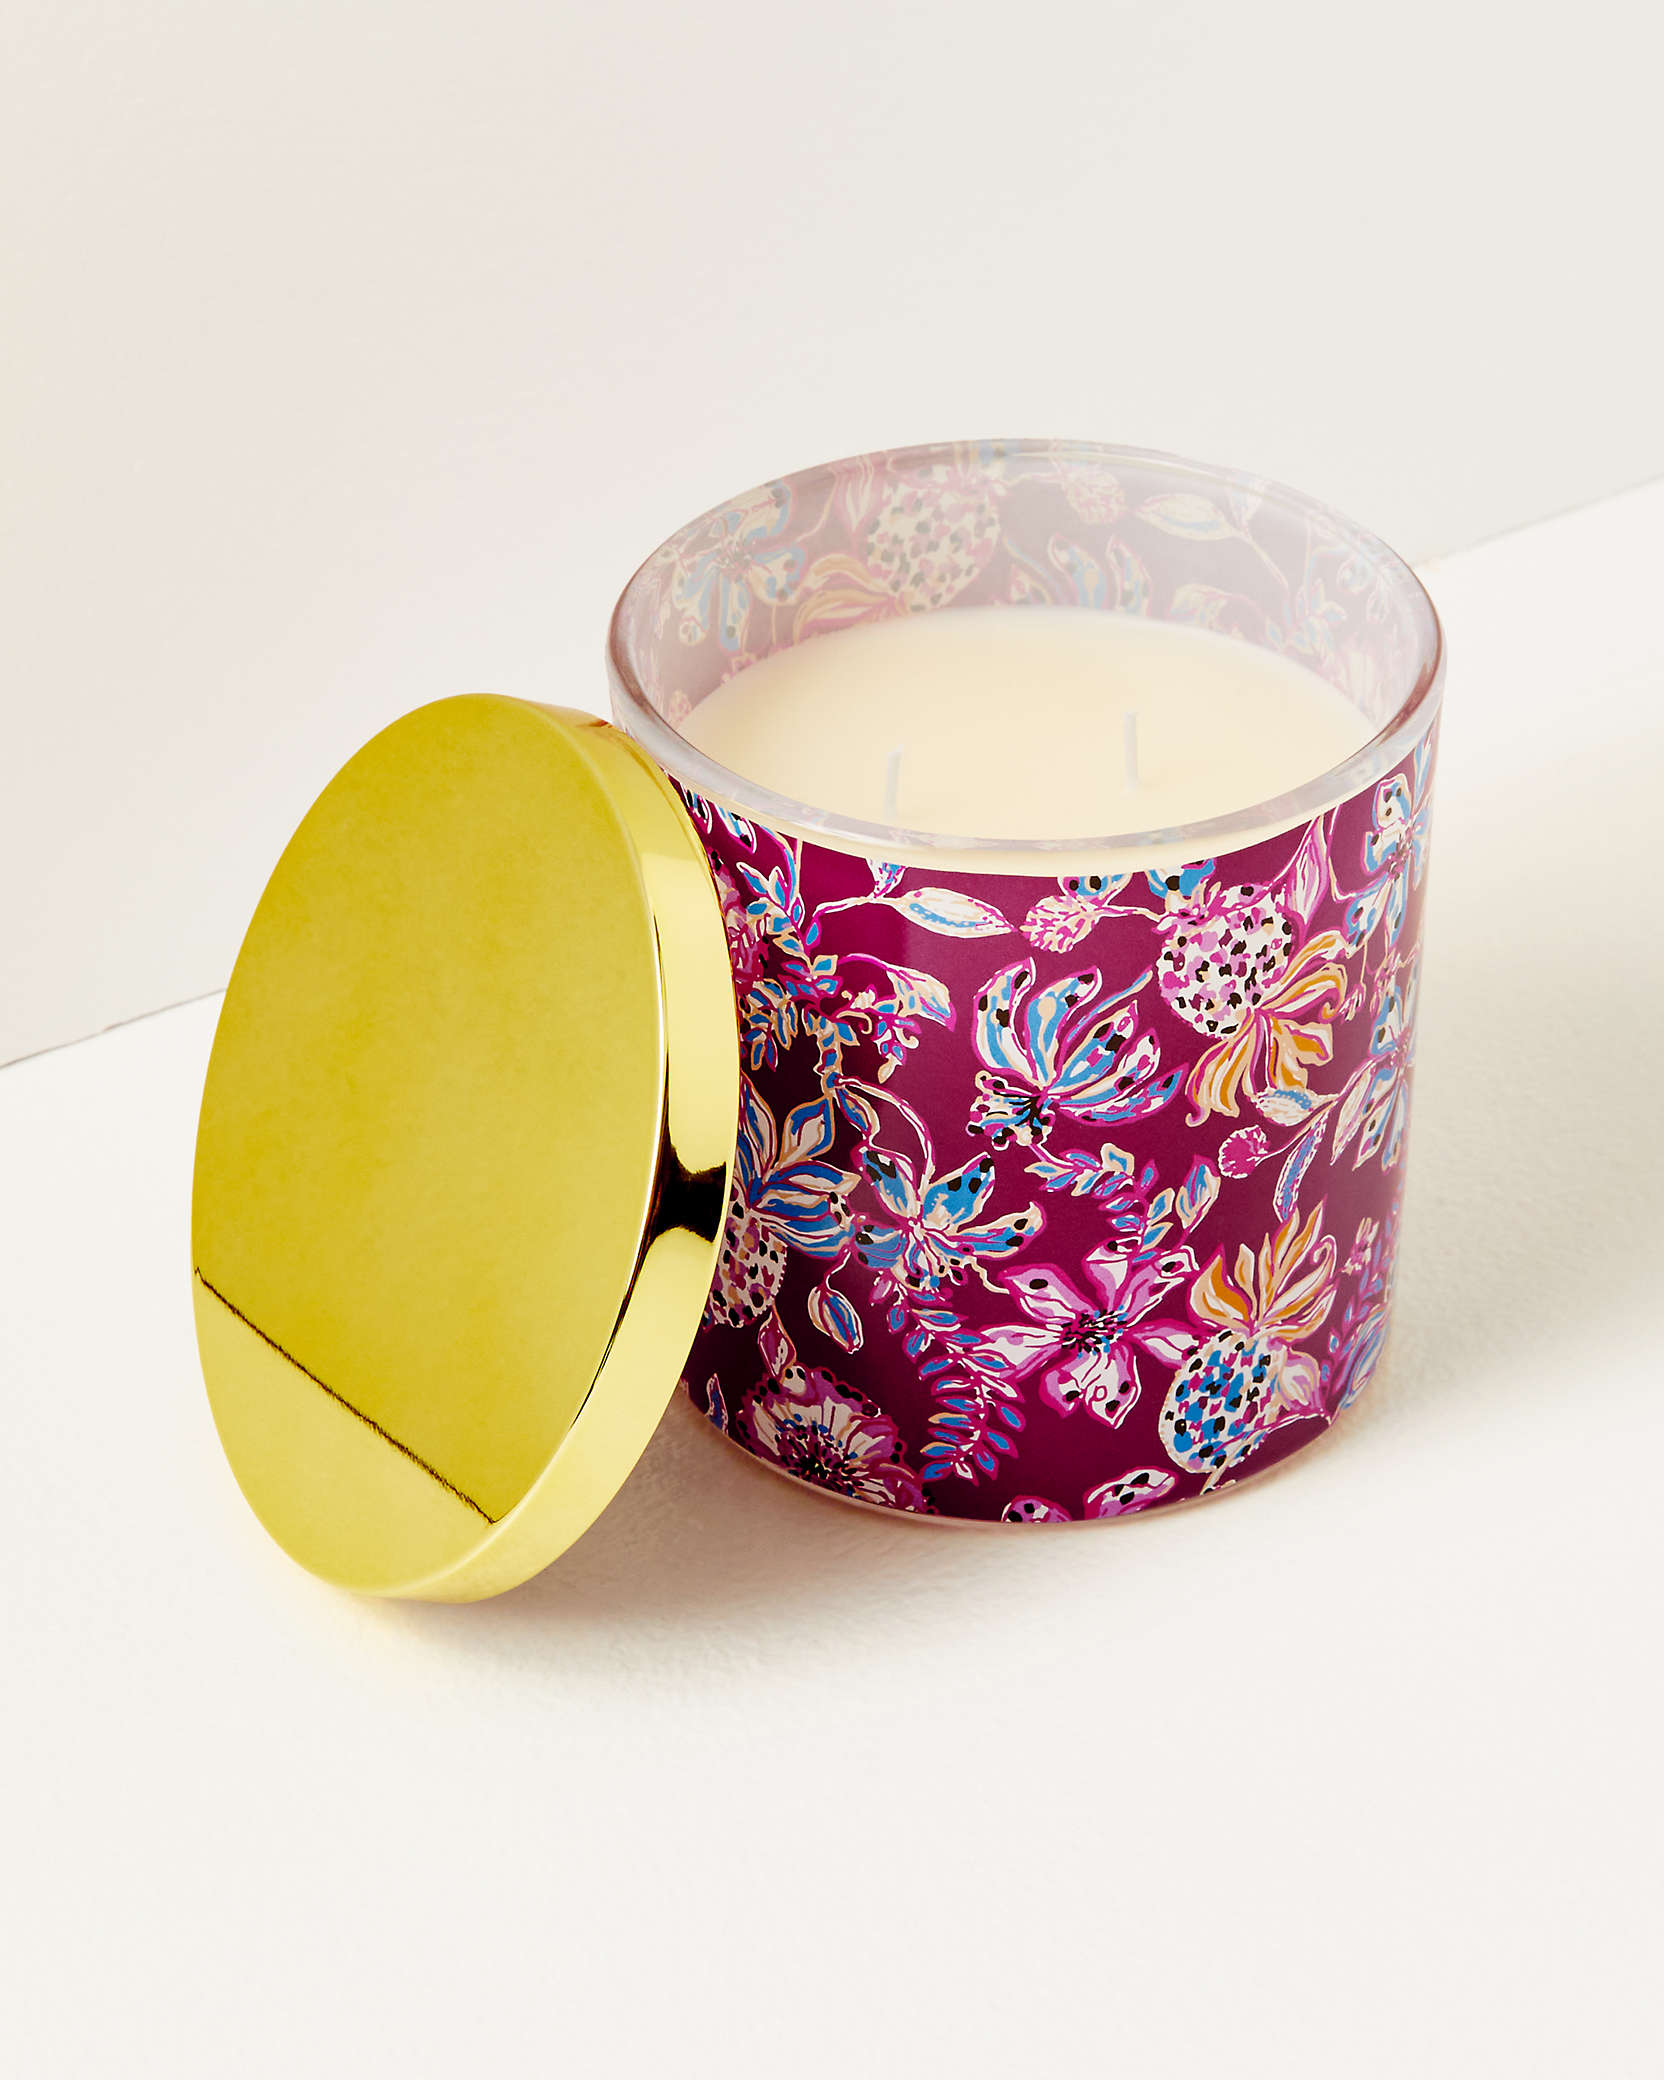 Lilly Pulitzer Printed Candle In Amarena Cherry Tropical With A Twist